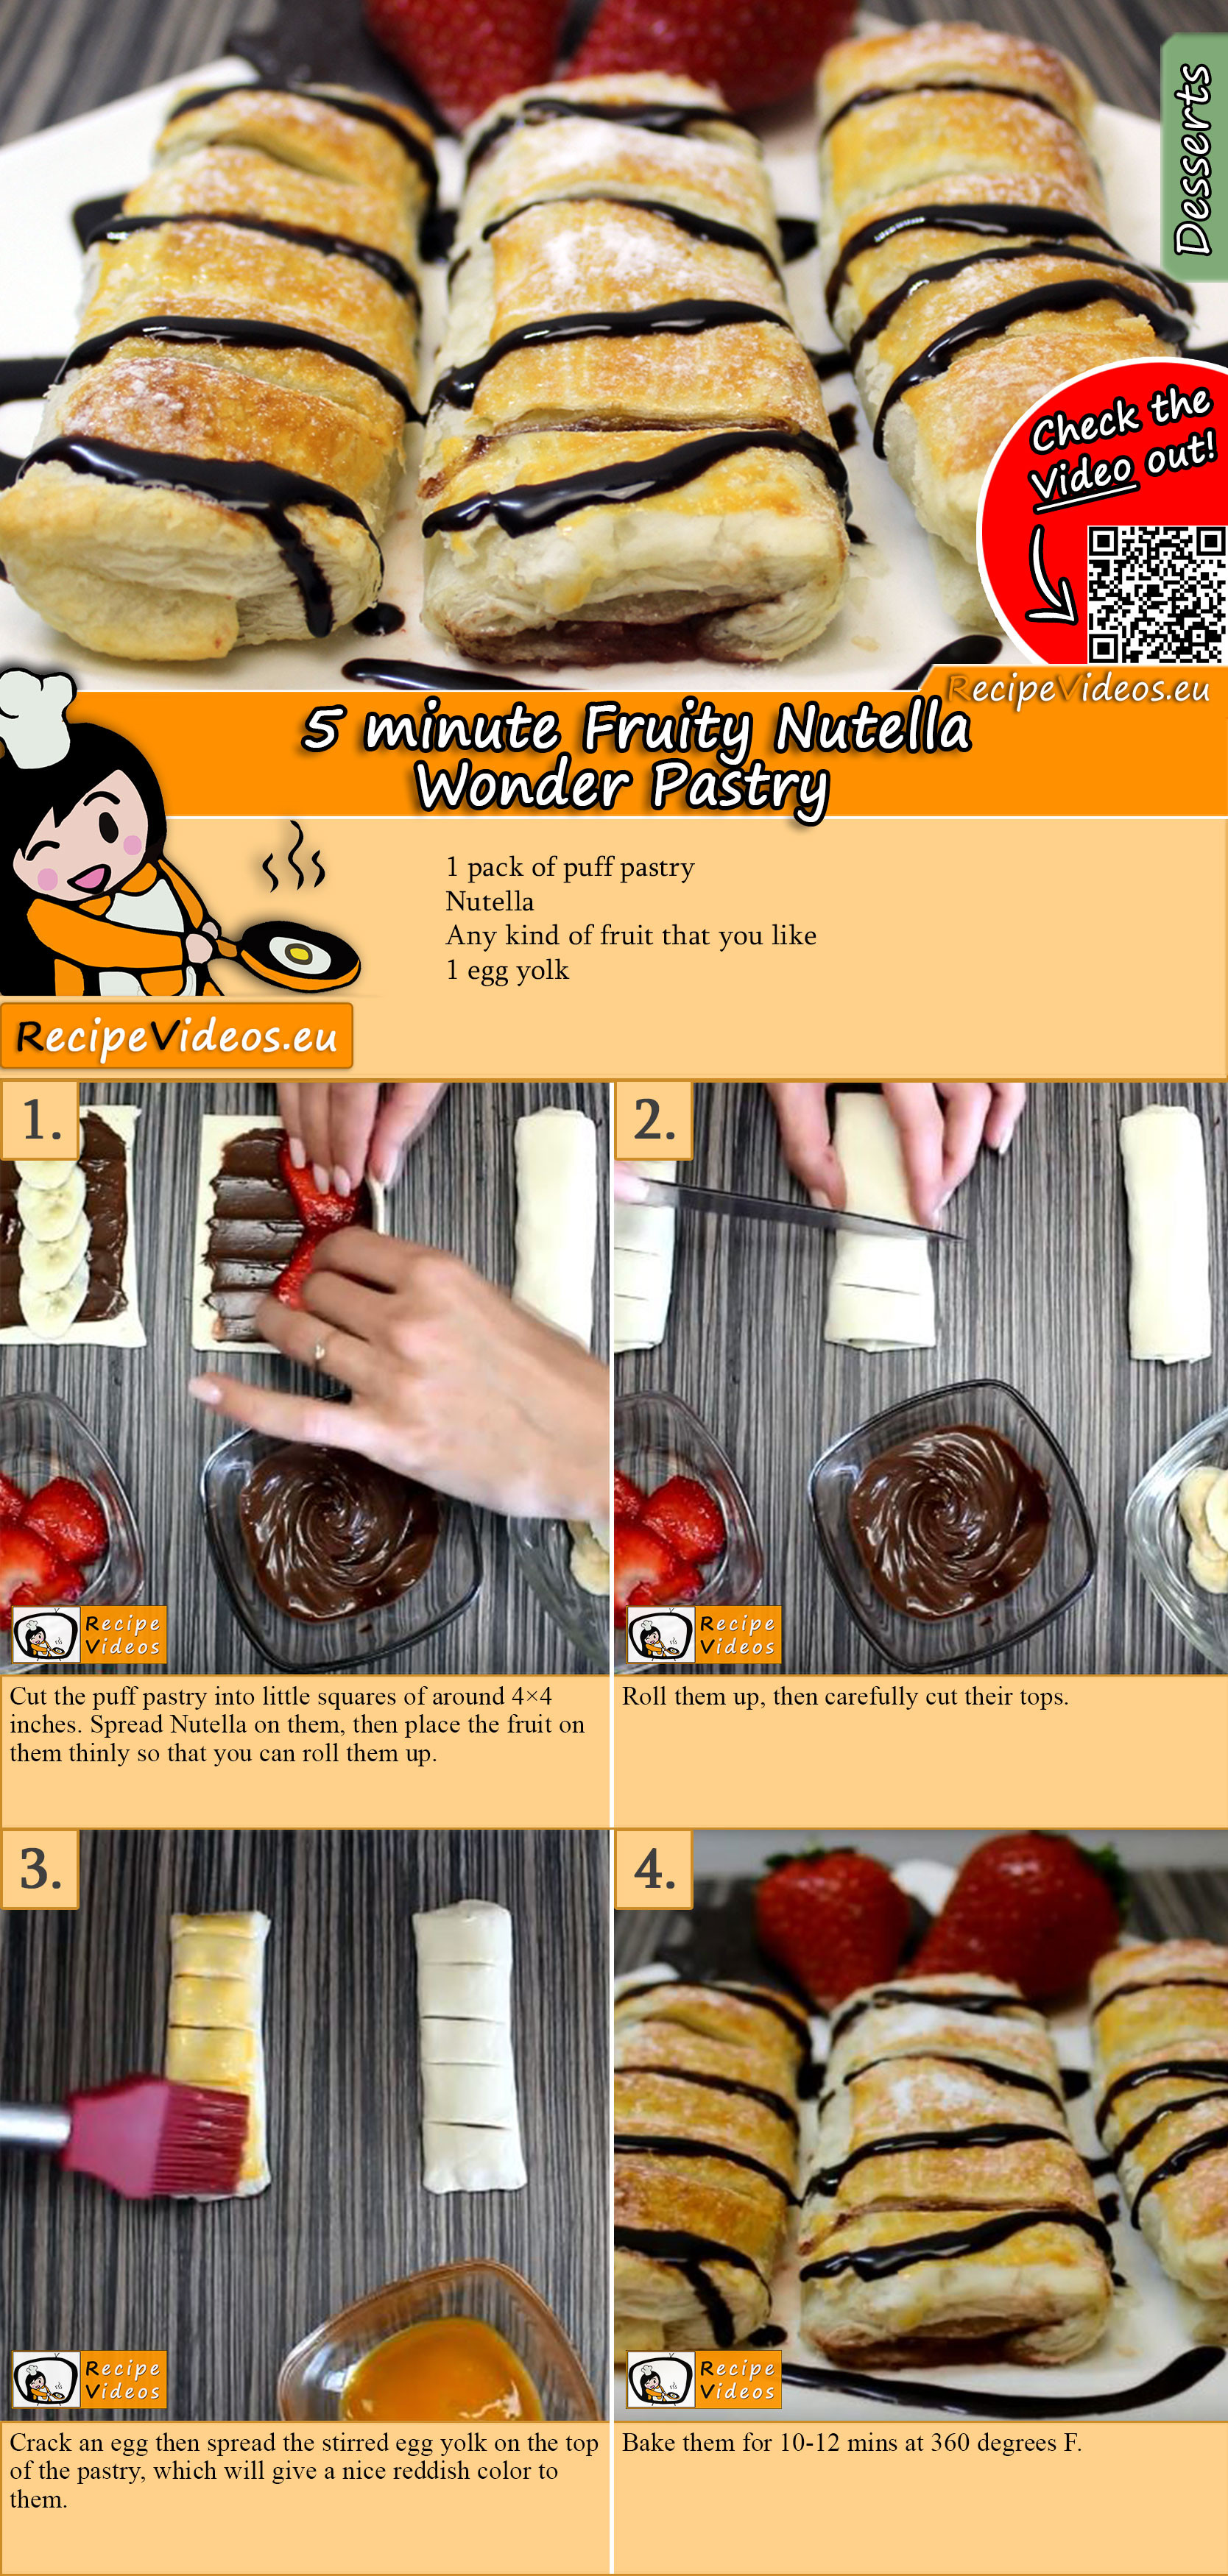 5 minute Fruity Nutella Wonder Pastry recipe with video